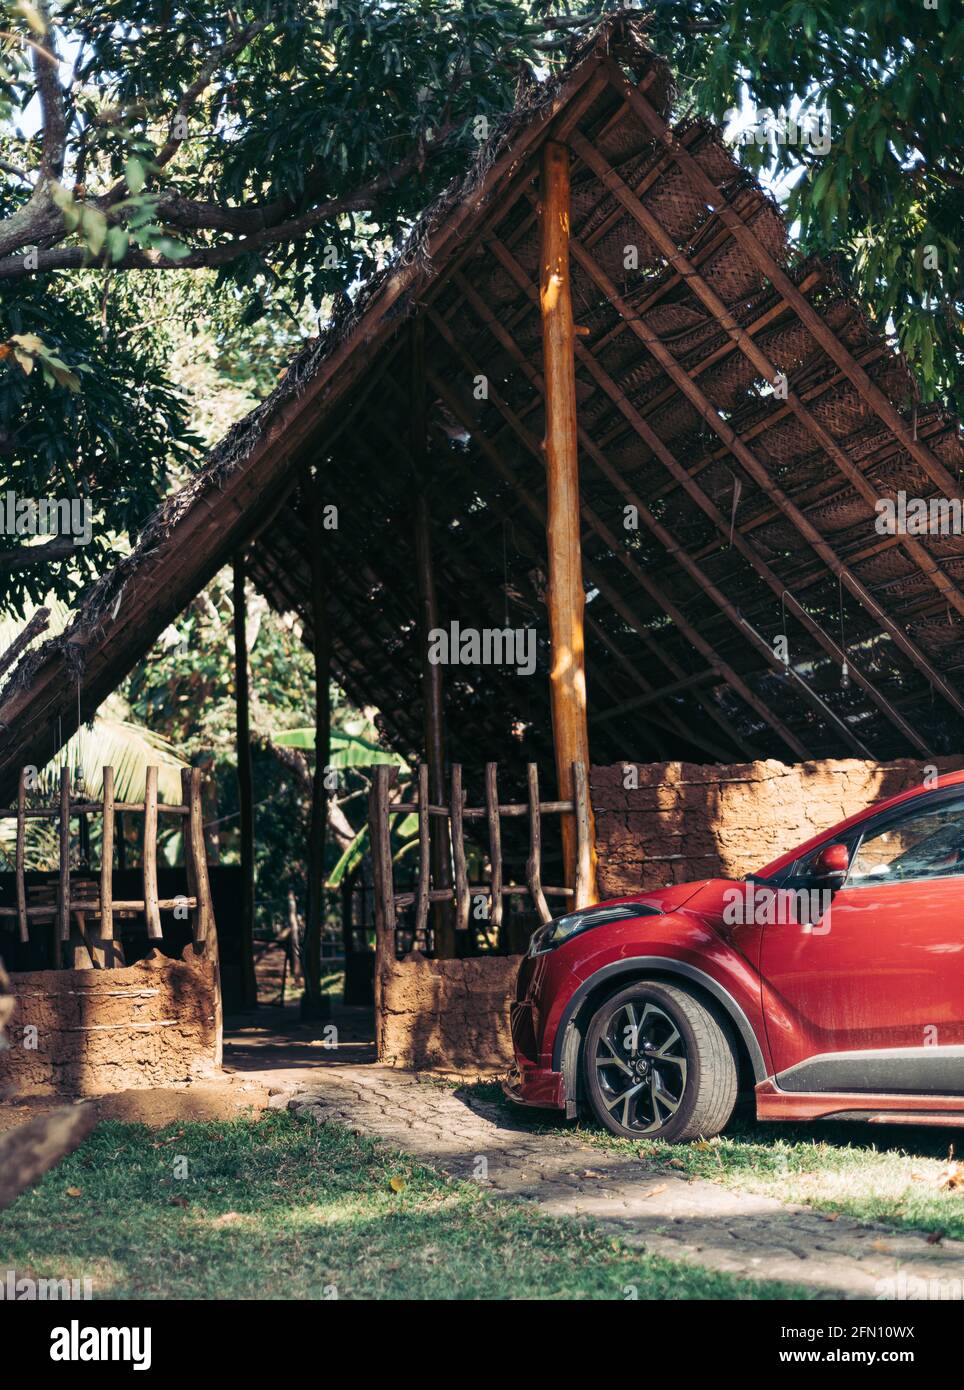 A luxury vehicle parked in front of a thatched village hut, Stock Photo